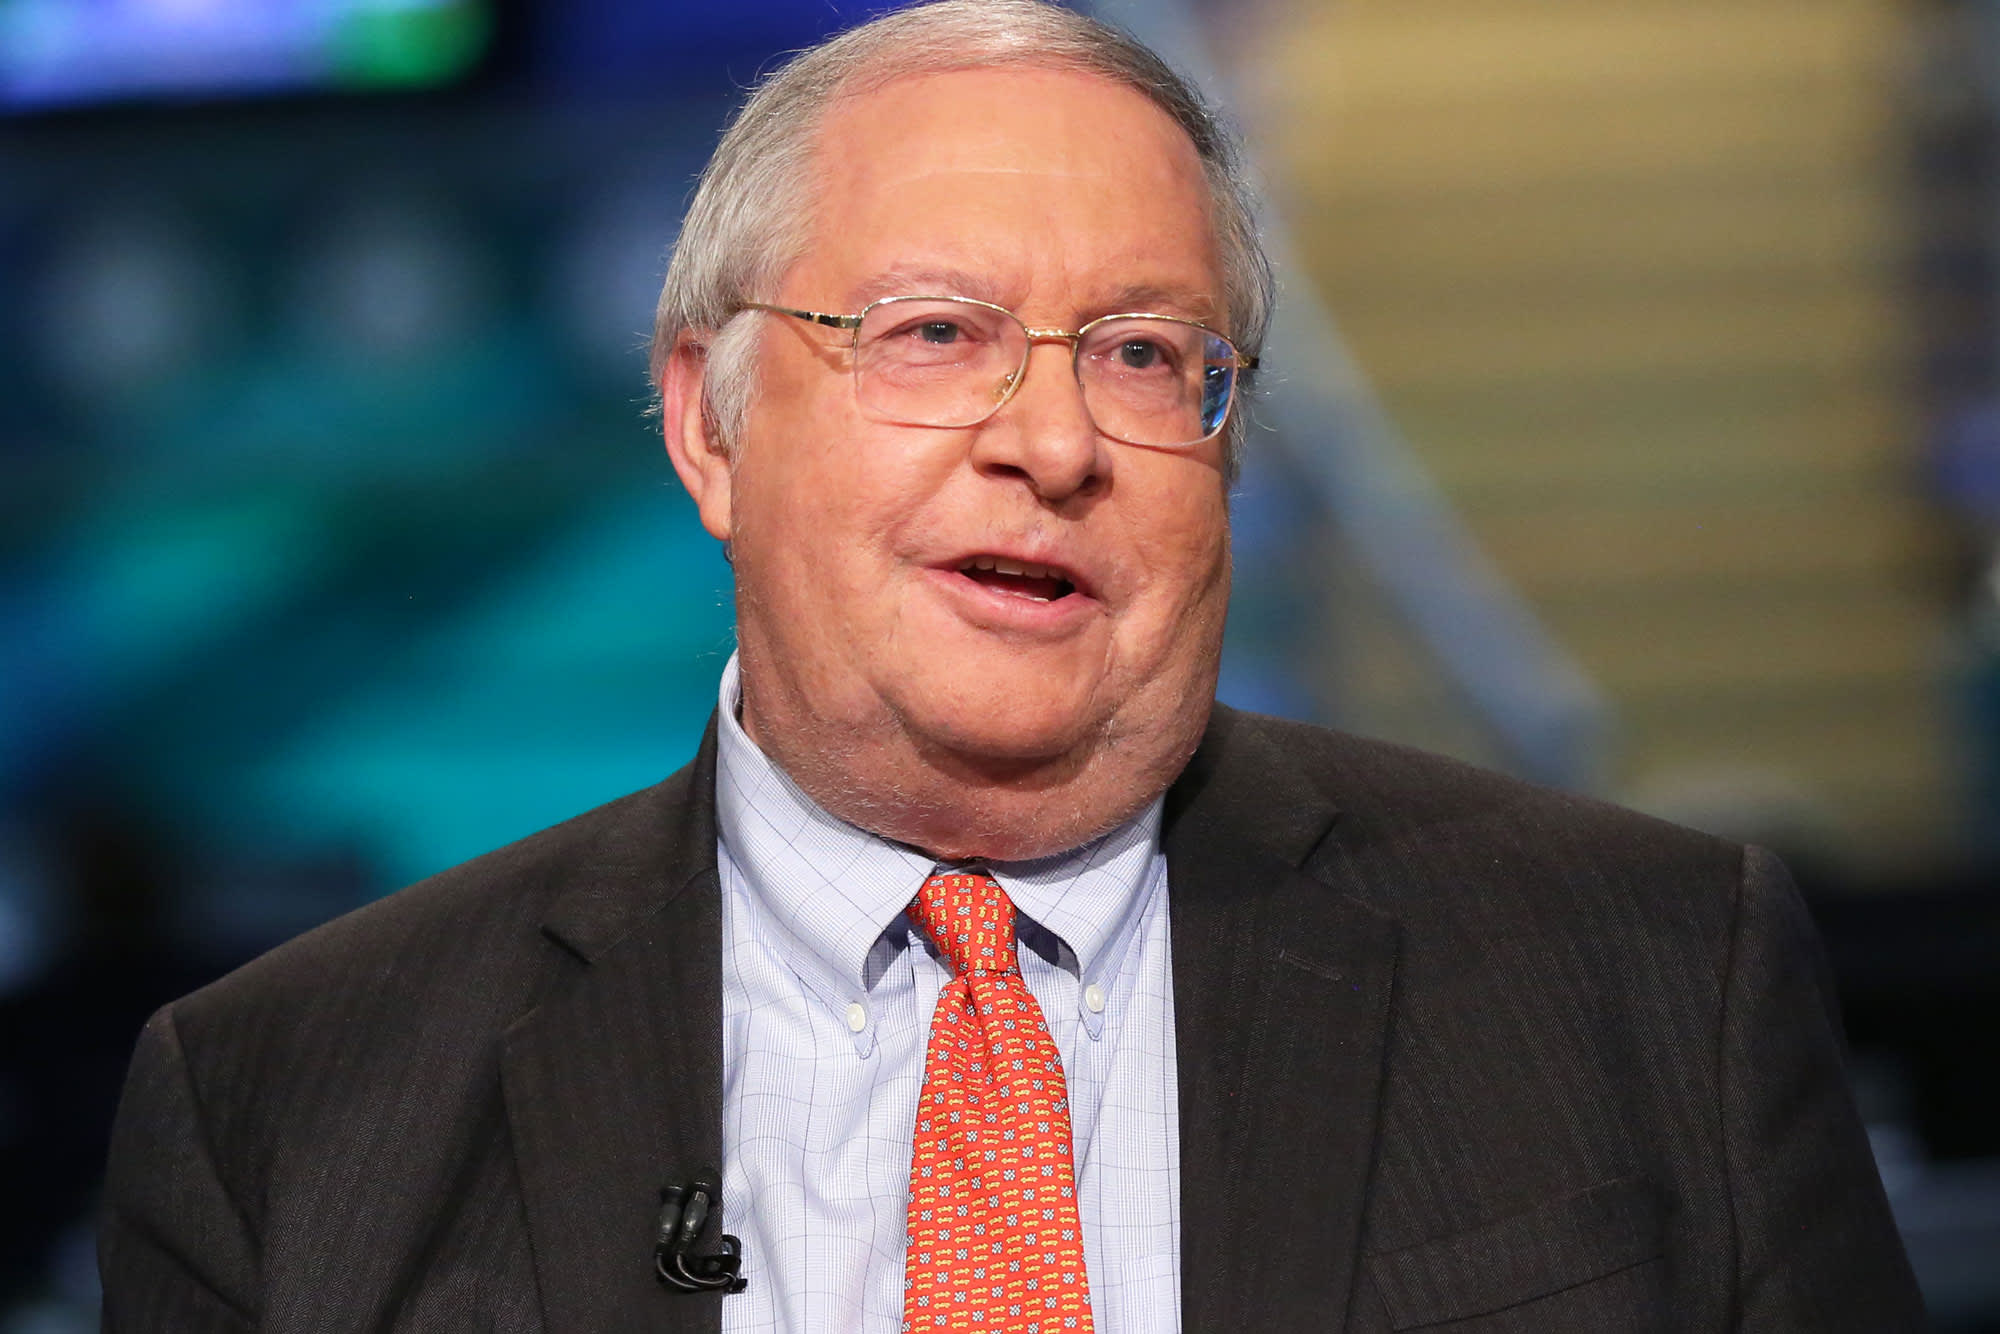 Bill Miller’s firm sold GameStop ownership during initial Reddit frenzy